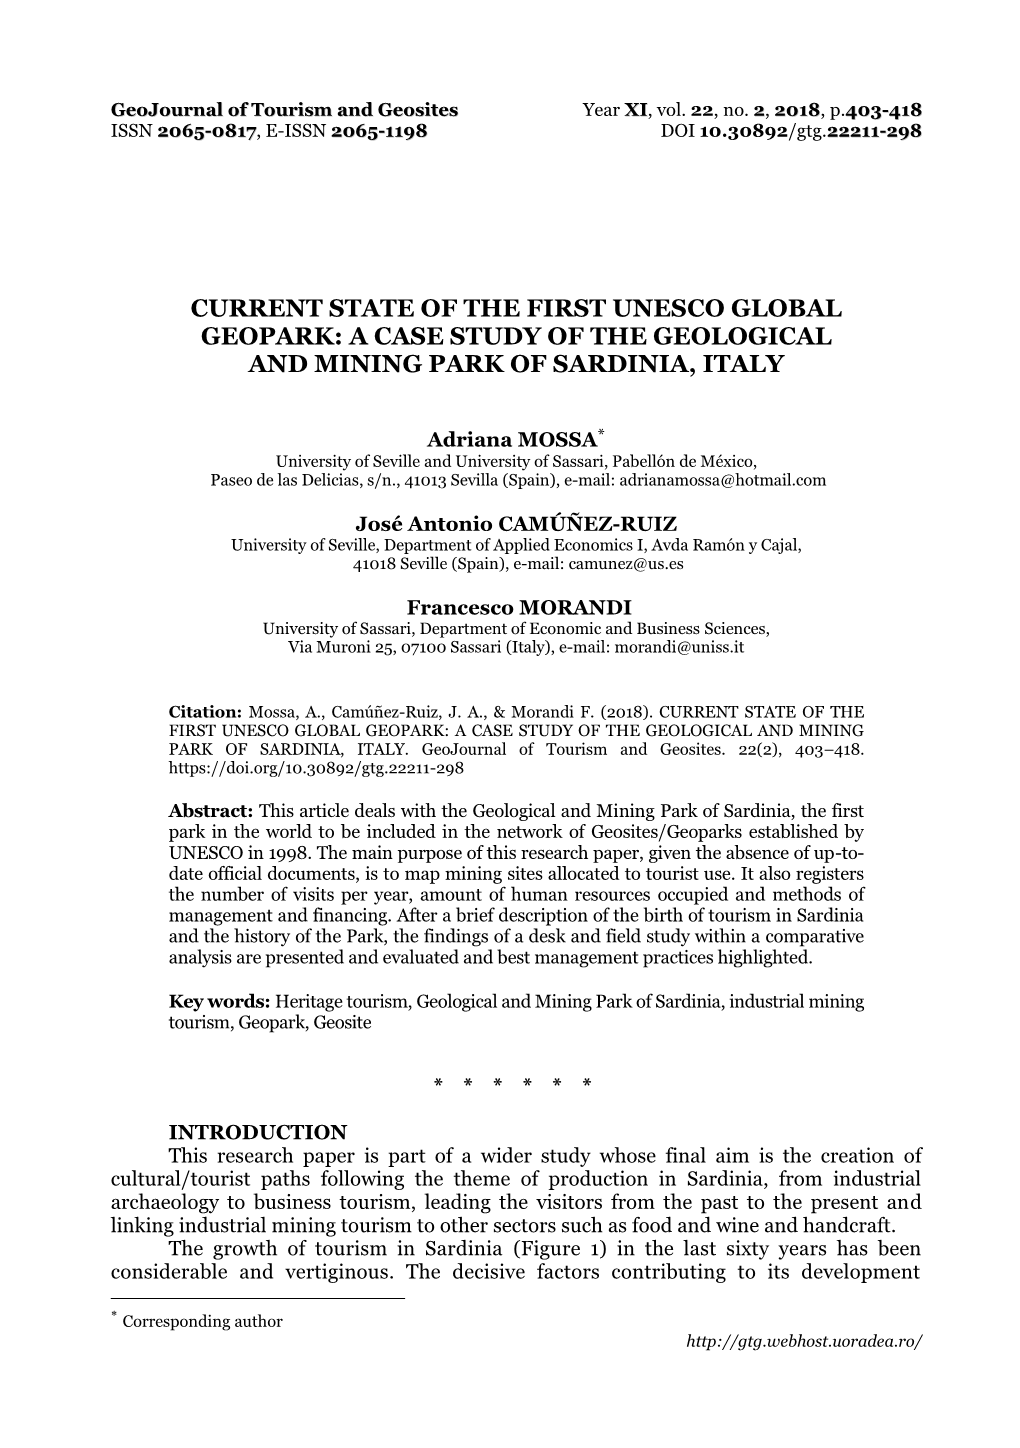 Current State of the First Unesco Global Geopark: a Case Study of the Geological and Mining Park of Sardinia, Italy